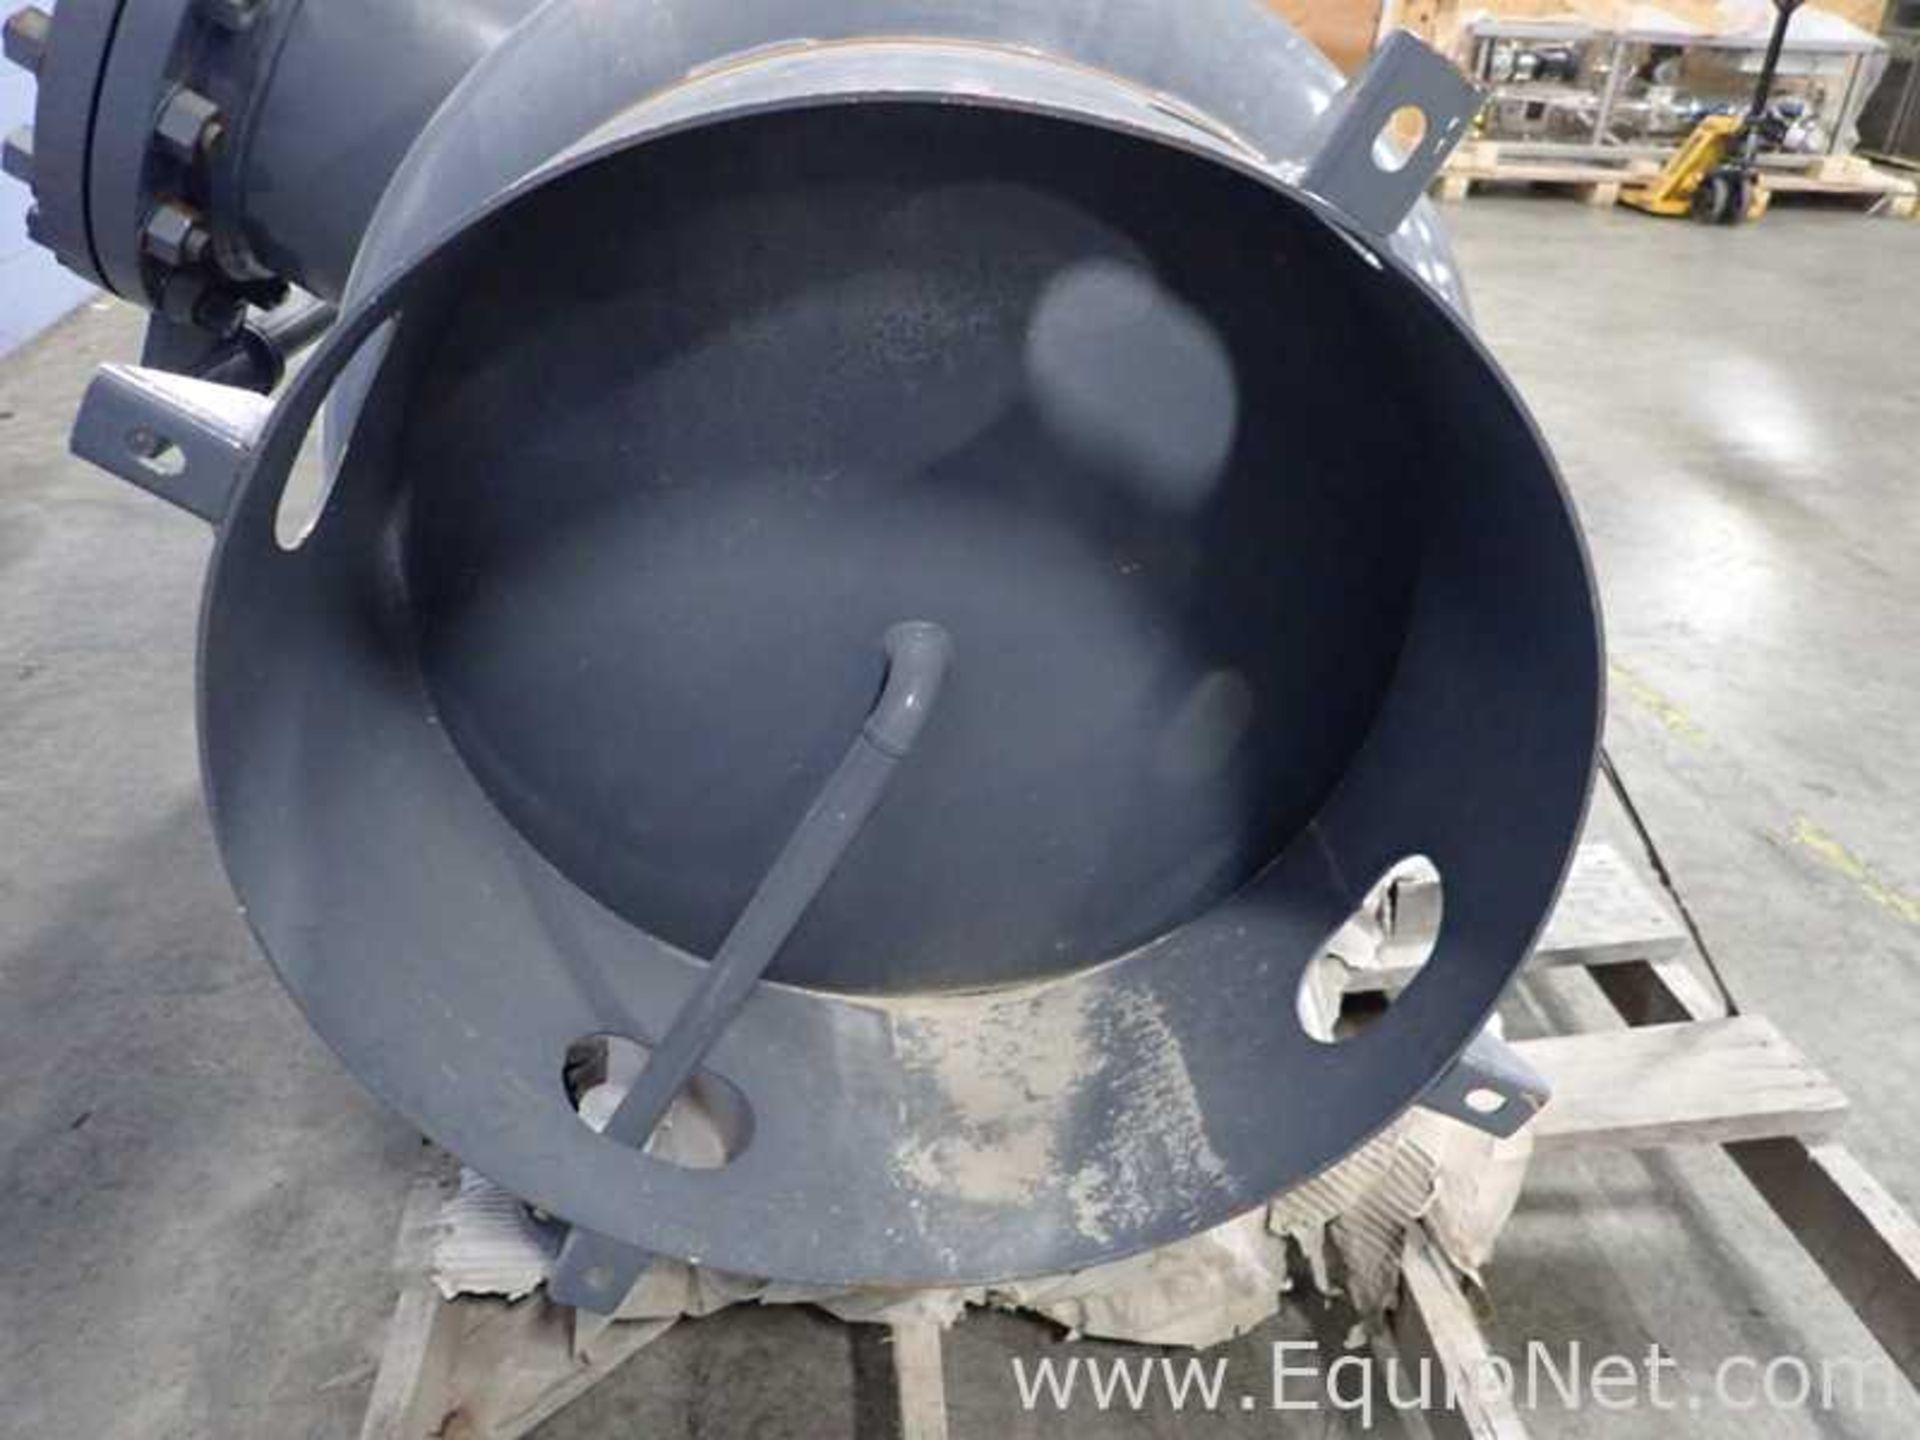 EQUIPNET LISTING #765750; REMOVAL COST: $40; DESCRIPTION: Steel Fab Carbon Steel Receiving Tank - Image 6 of 8